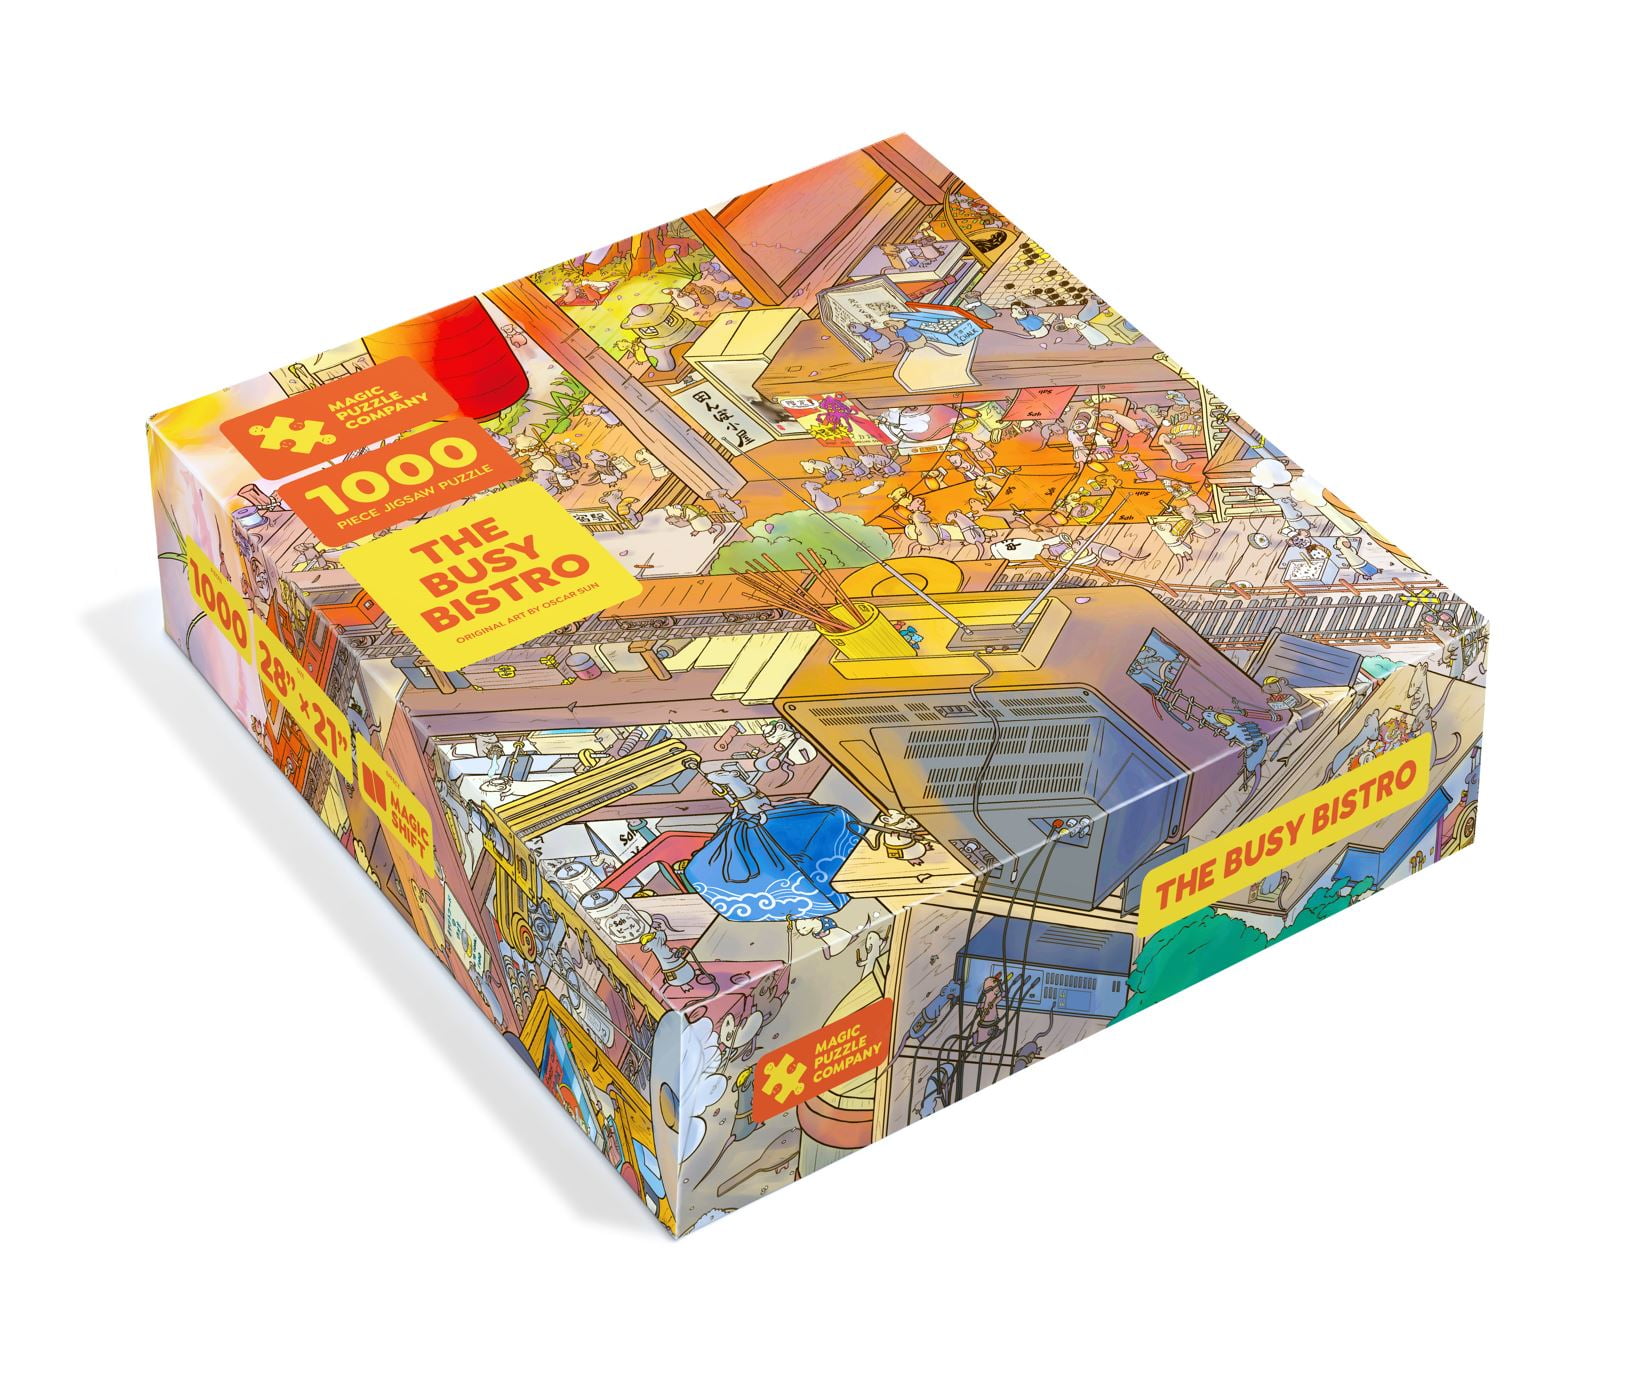 Oscar Underwater World Puzzle 3 foot Puzzle - Brown Toy Box